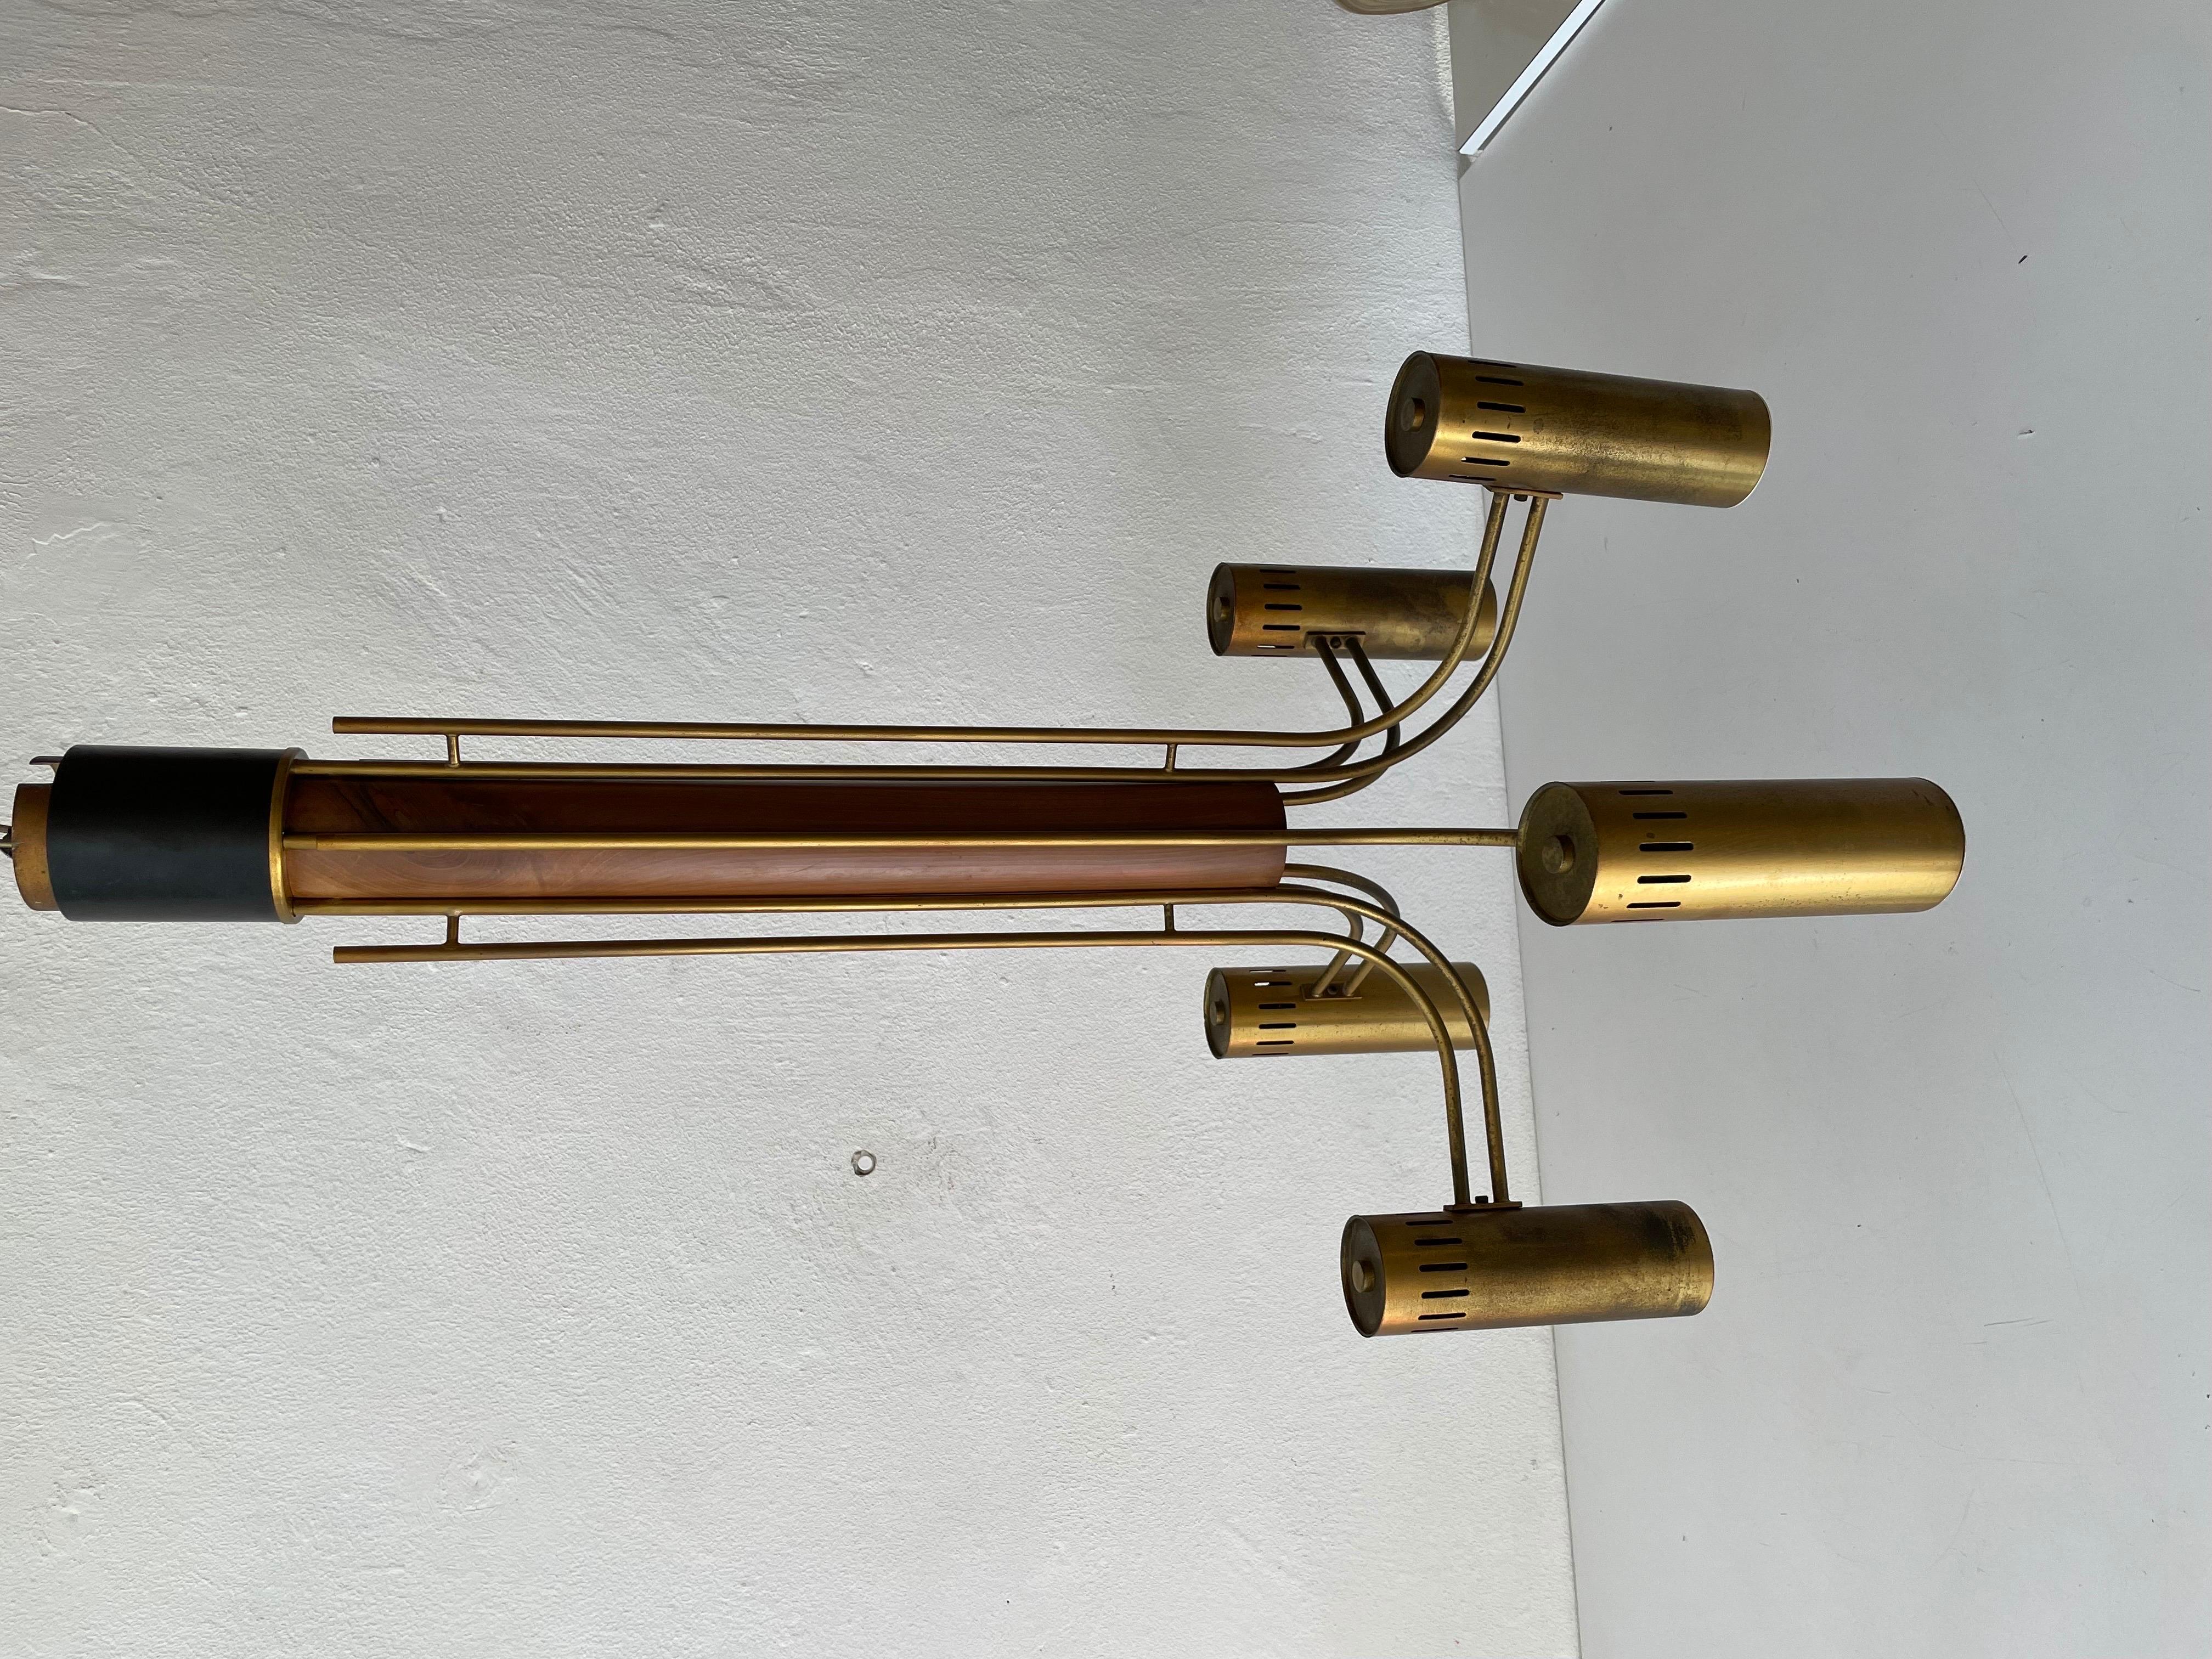 Exclusive 5-armed brass and wood flush mount chandelier Angelo Brotto for Esperia, 1970s, Italy

Lampshade is in very good vintage condition.
Original canopy.
Retains original manufacturers label. 

This lamp works with E27 light bulb. Max